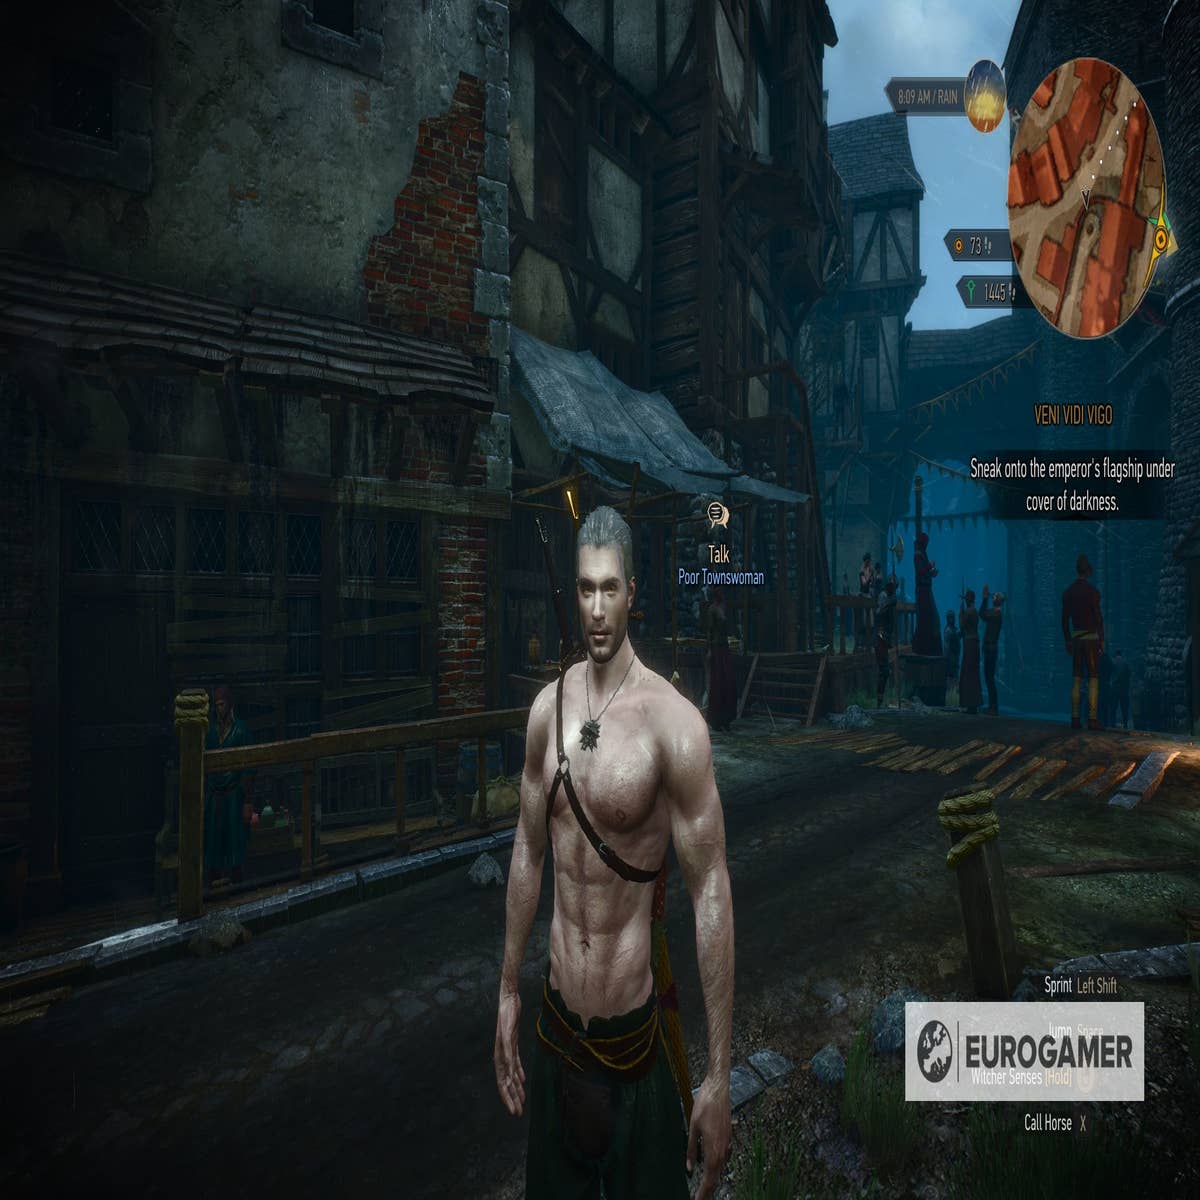 The Best Witcher 3 Mods